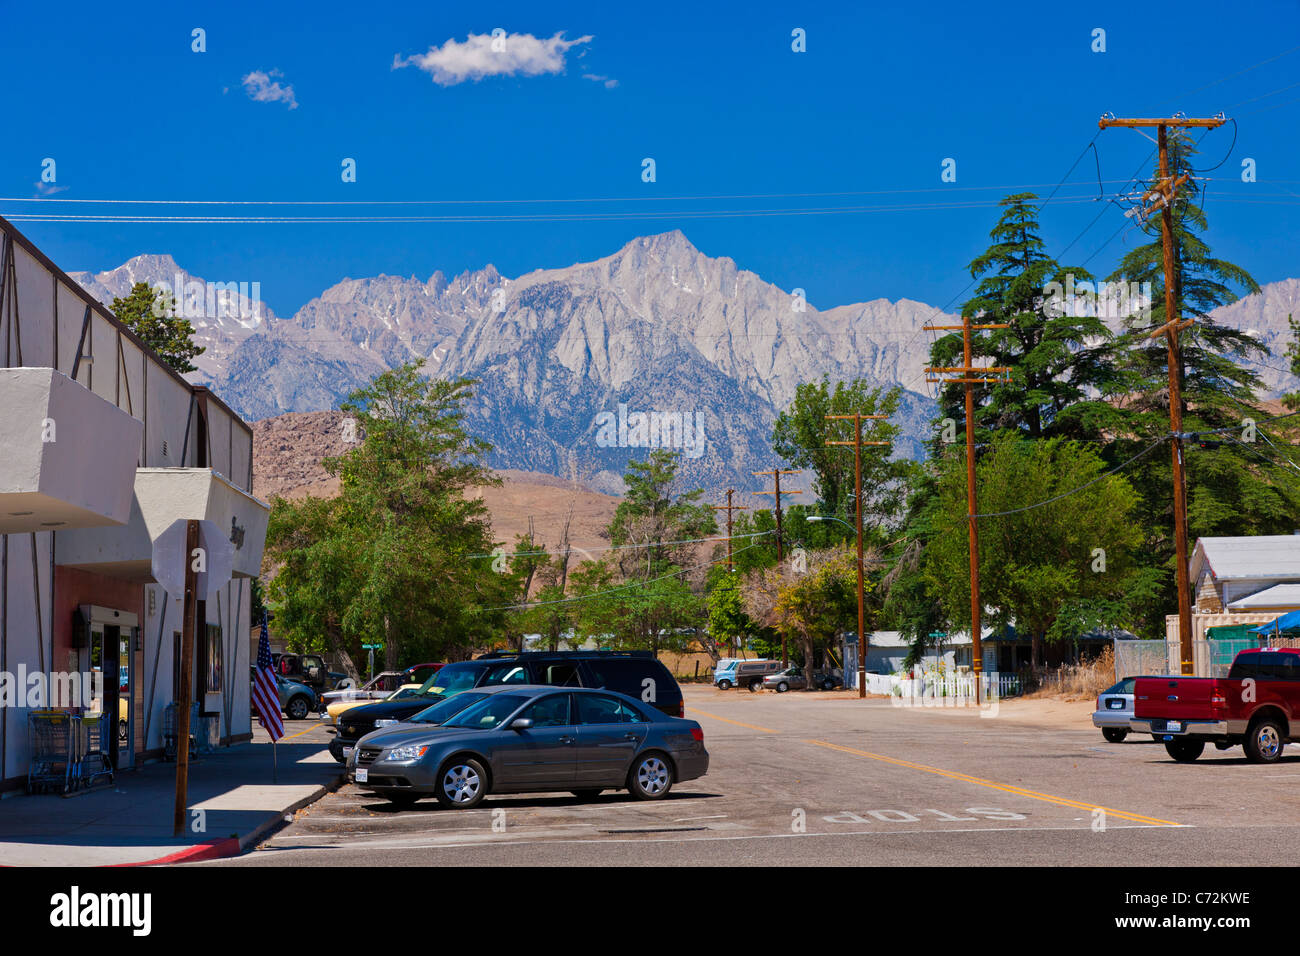 Lone Pine Peak overlooking Lone Pine in the Owens Valley, east of the Sierra Nevada, California USA. JMH5318 Stock Photo